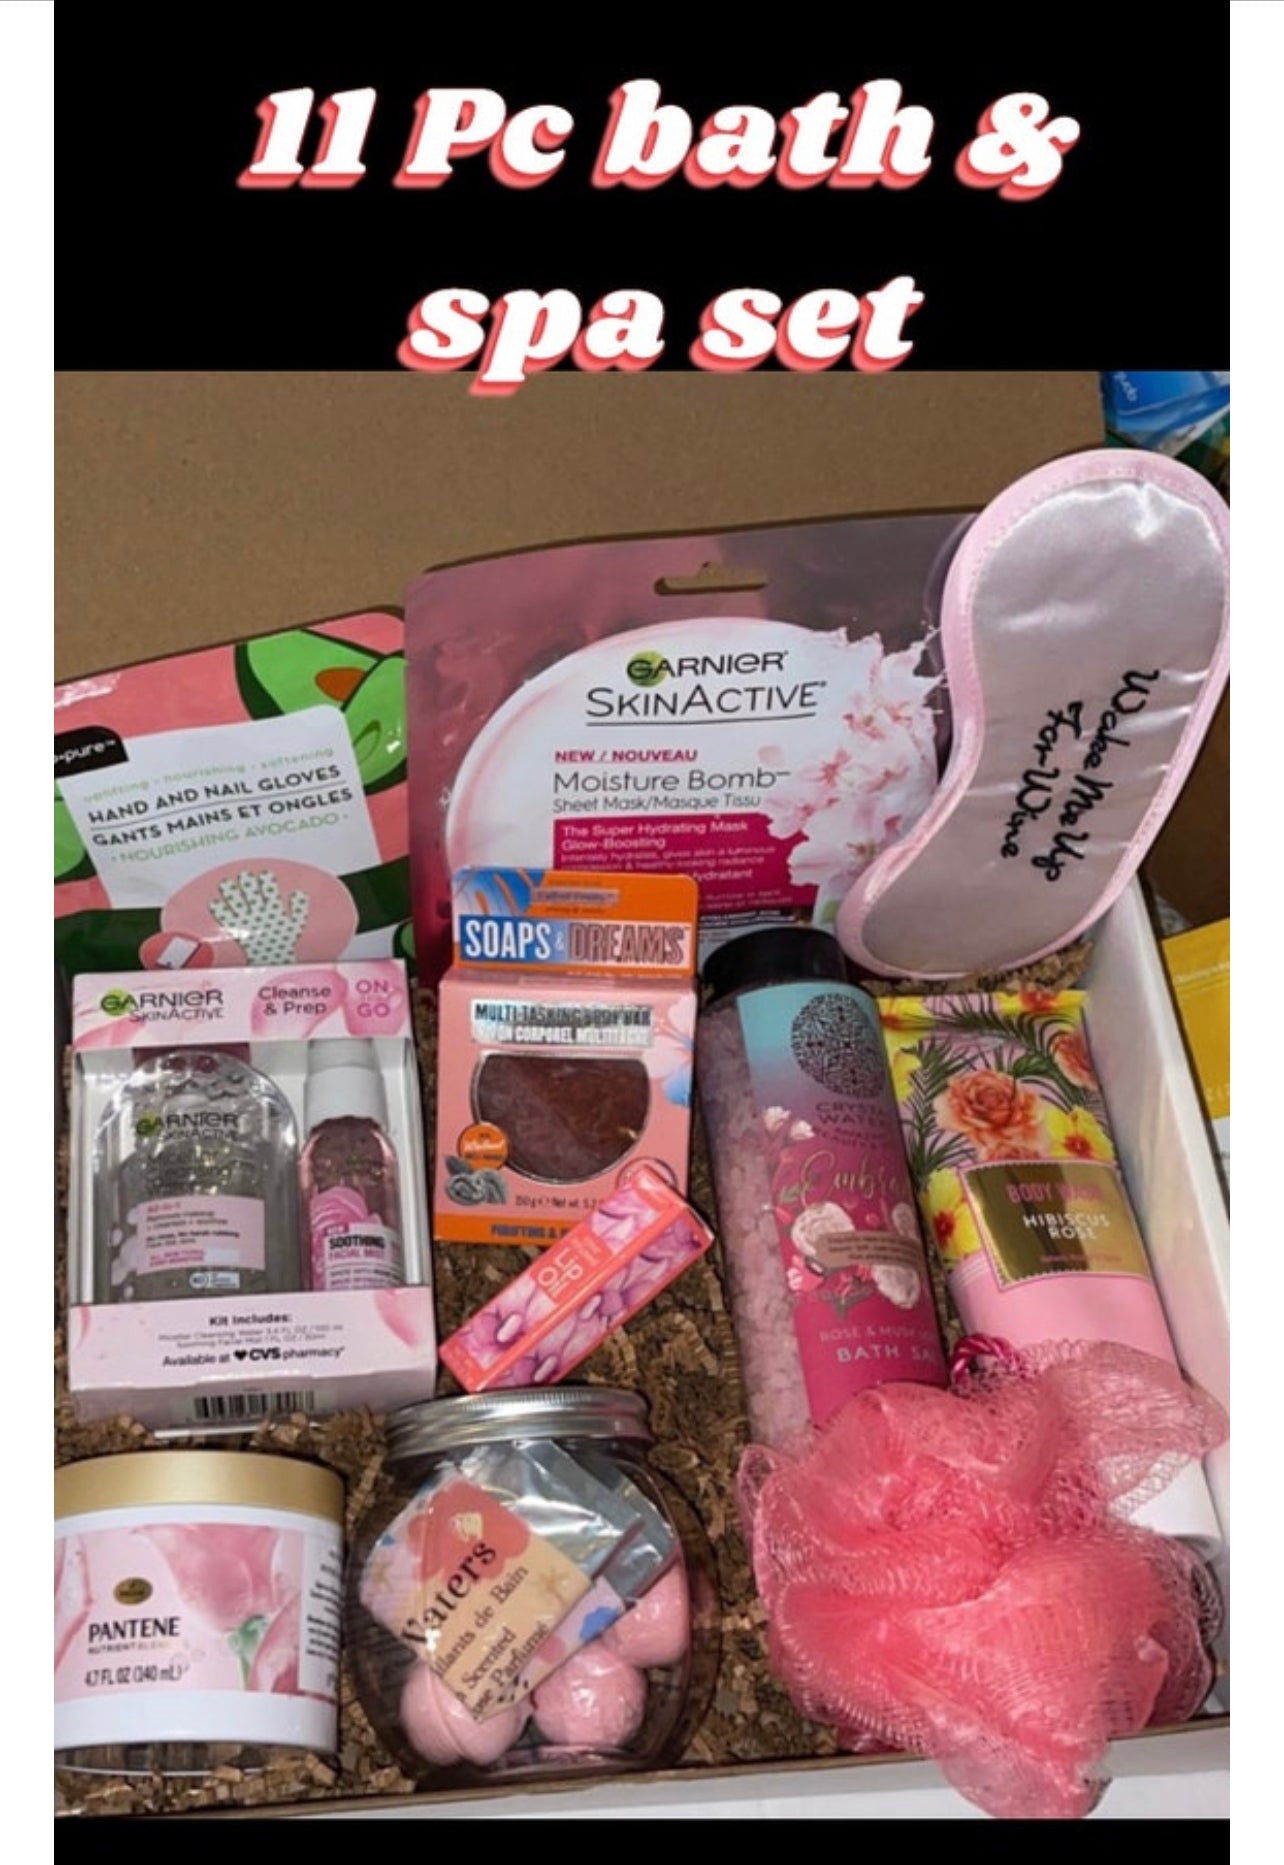 11 Pc facial body & bath spa gift set Box Valentine’s Day Birthday Shower Thinking Of You Get well any occasion gift sets free shipping